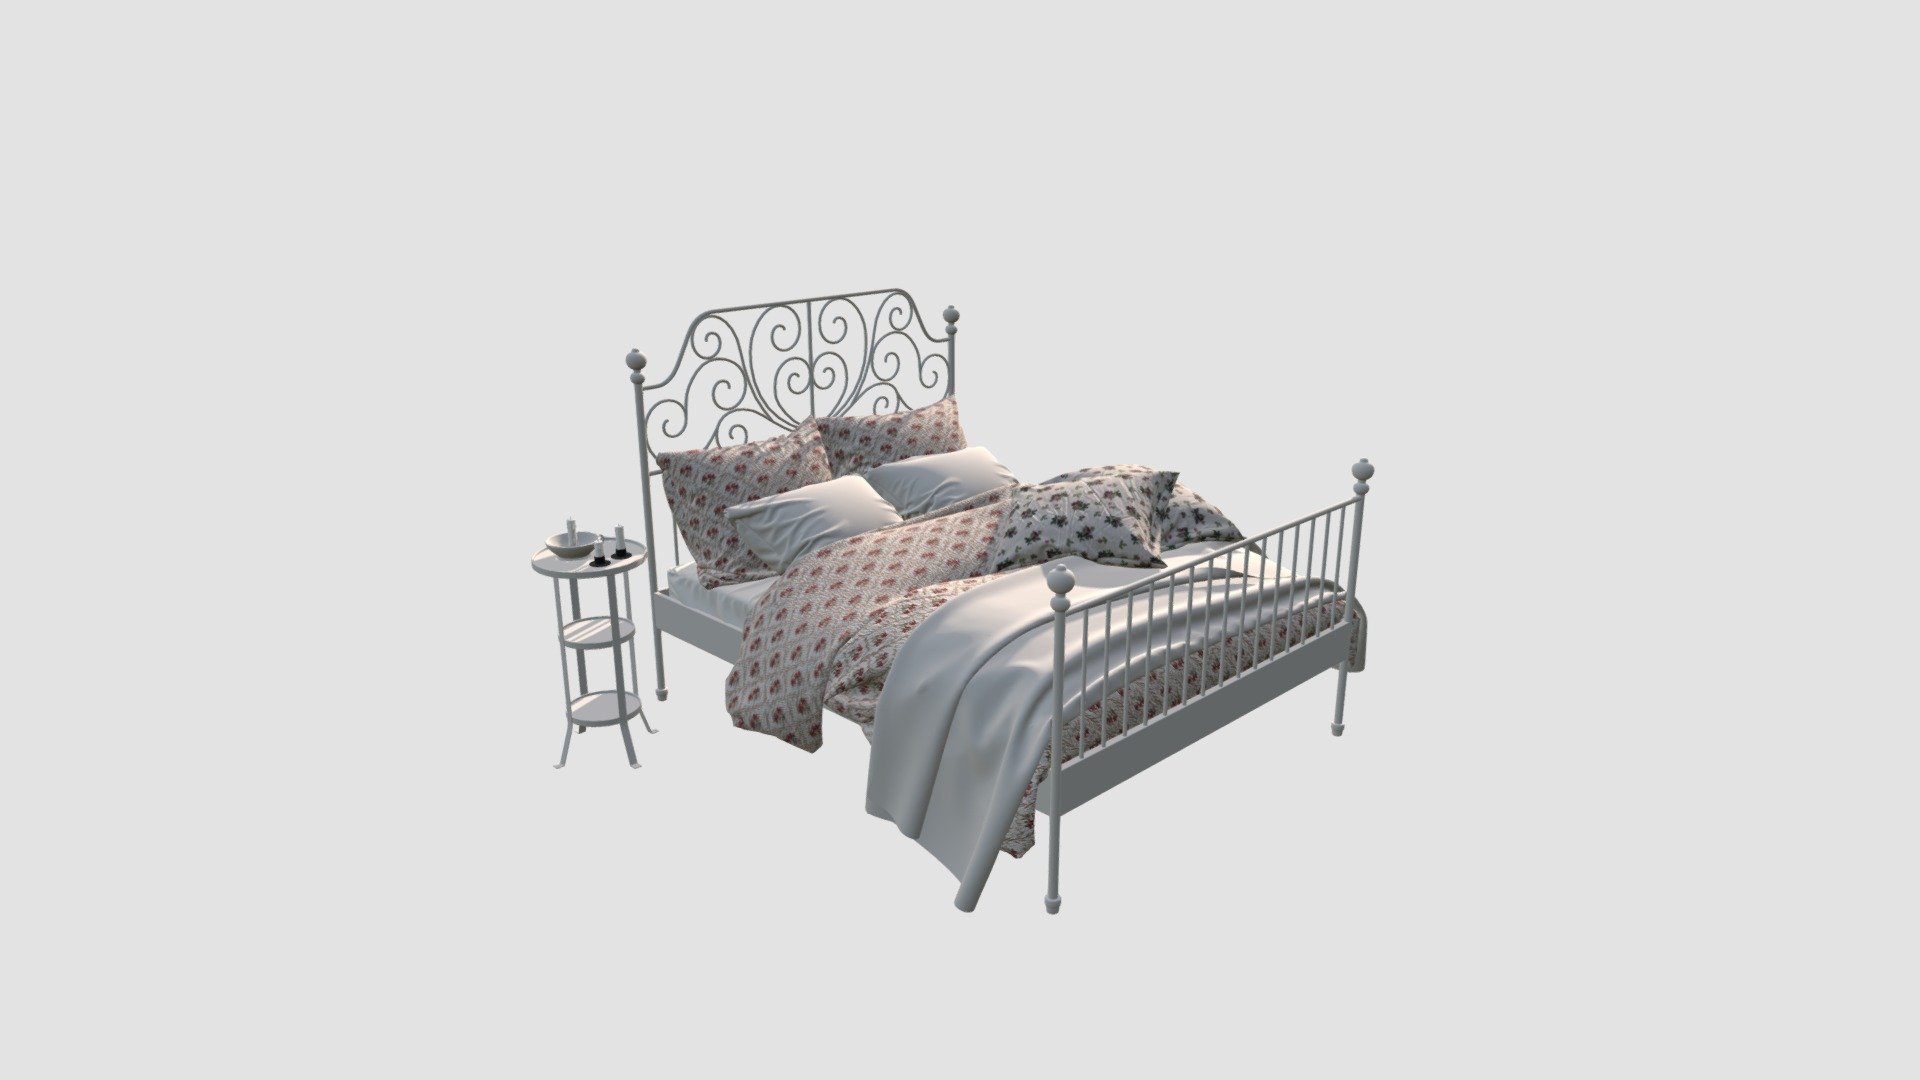 Highly detailed 3d model of bed with all textures, shaders and materials. It is ready to use, just put it into your scene 3d model